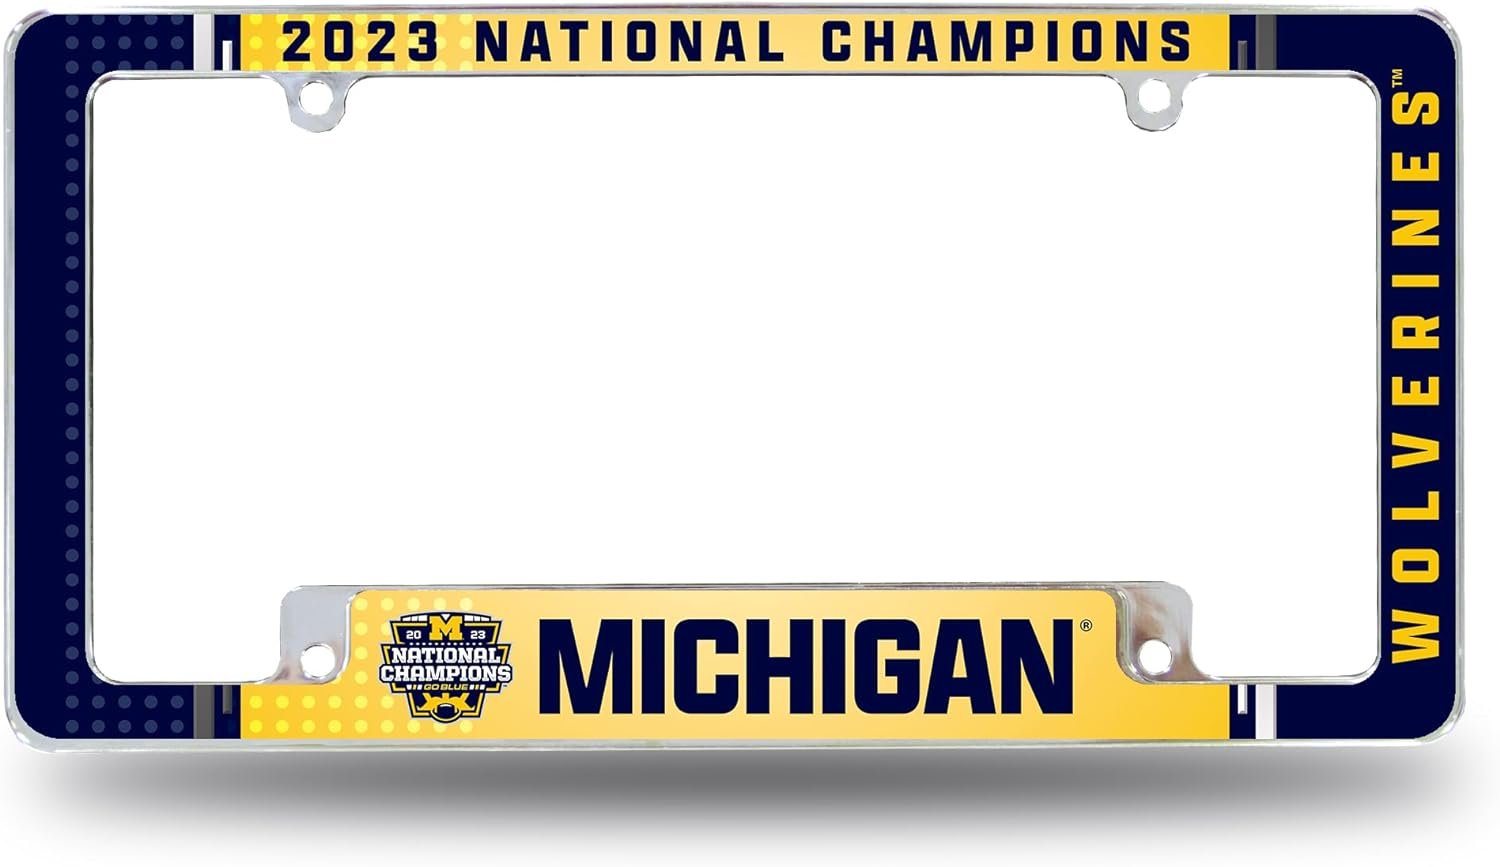 University of Michigan Wolverines 2024 Champions Chrome Metal License Plate Tag Frame Cover, All Over Design, 12x6 Inch